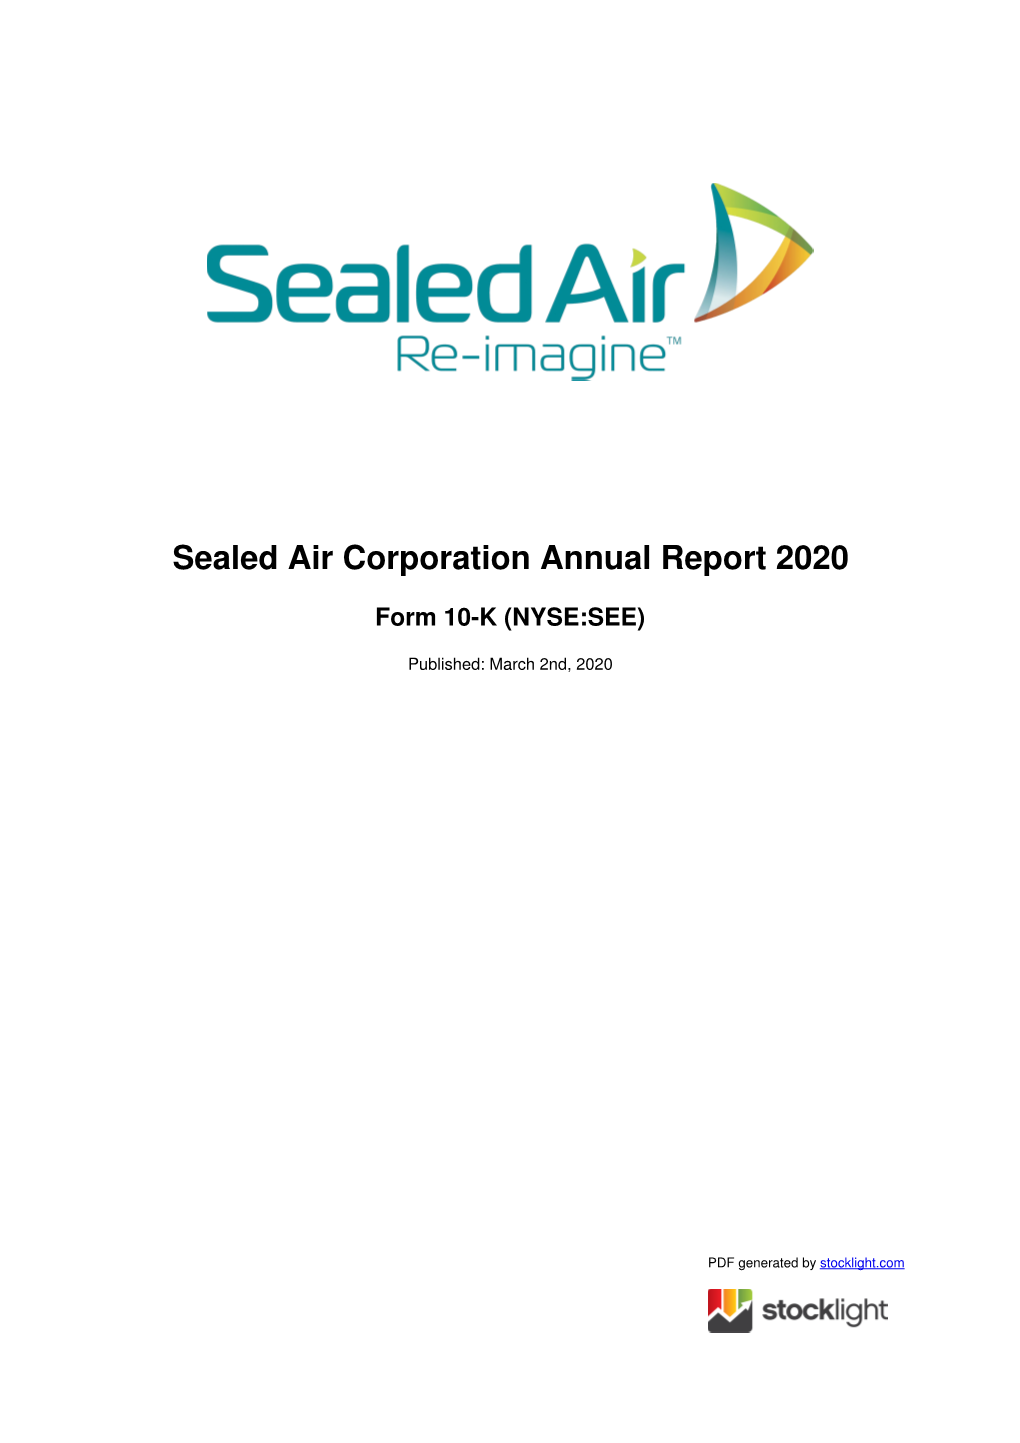 Sealed Air Corporation Annual Report 2020